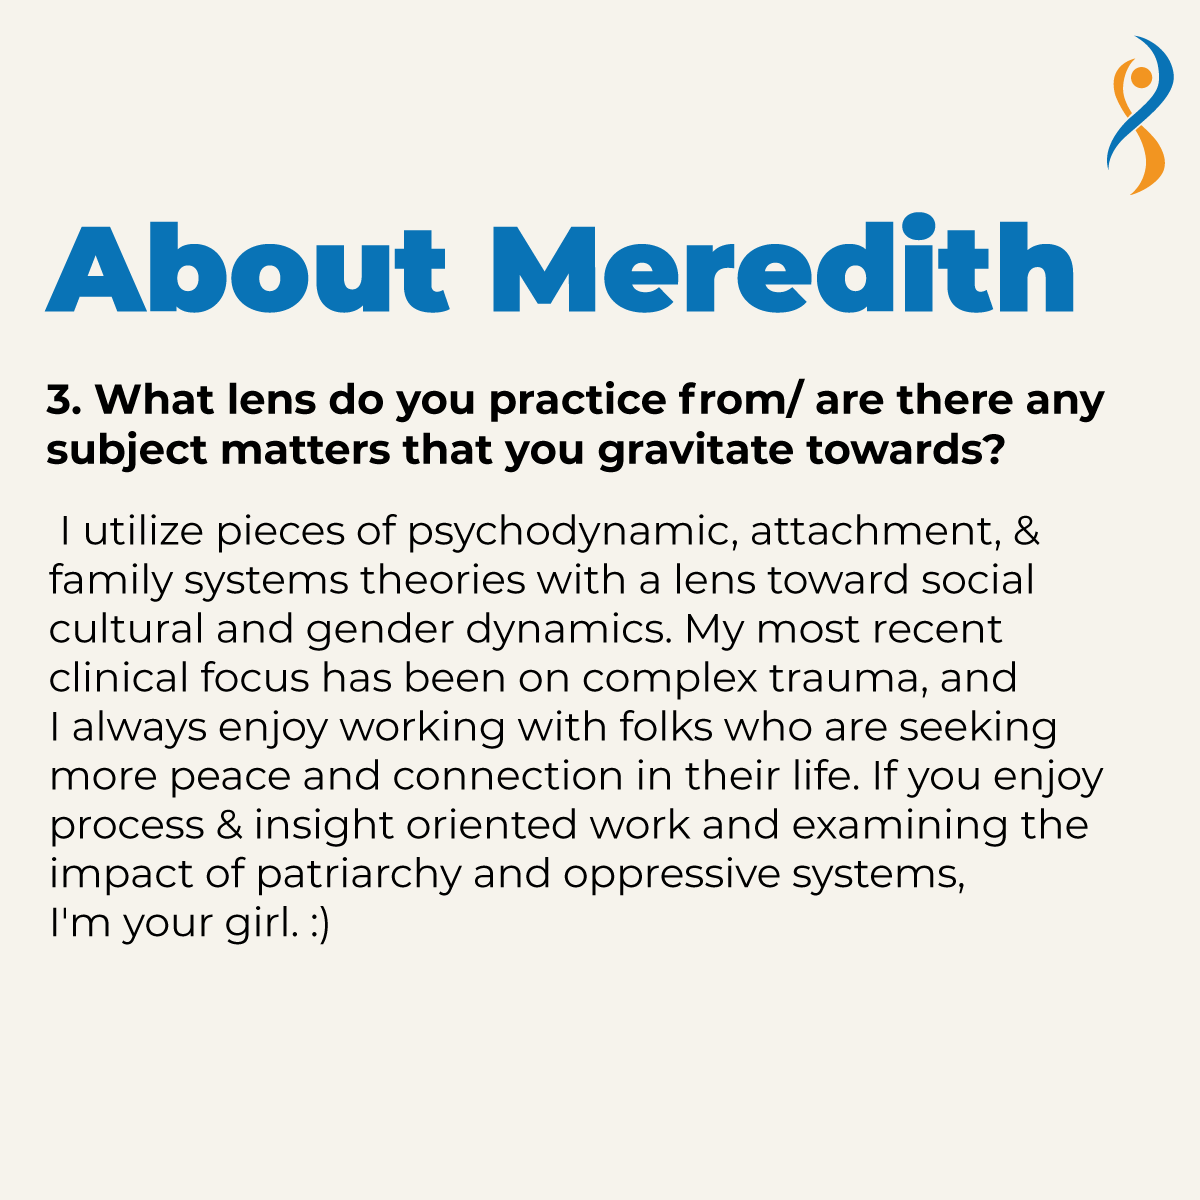 Meet Meredith Farster, LCSW. Are you or a community member looking for affirming therapy? Check out a few facts about Meredith and how she practices! Click the link below for more info and to schedule your appointment!
#iowatherapist #illinoistherapist 
bit.ly/3r0JsyB